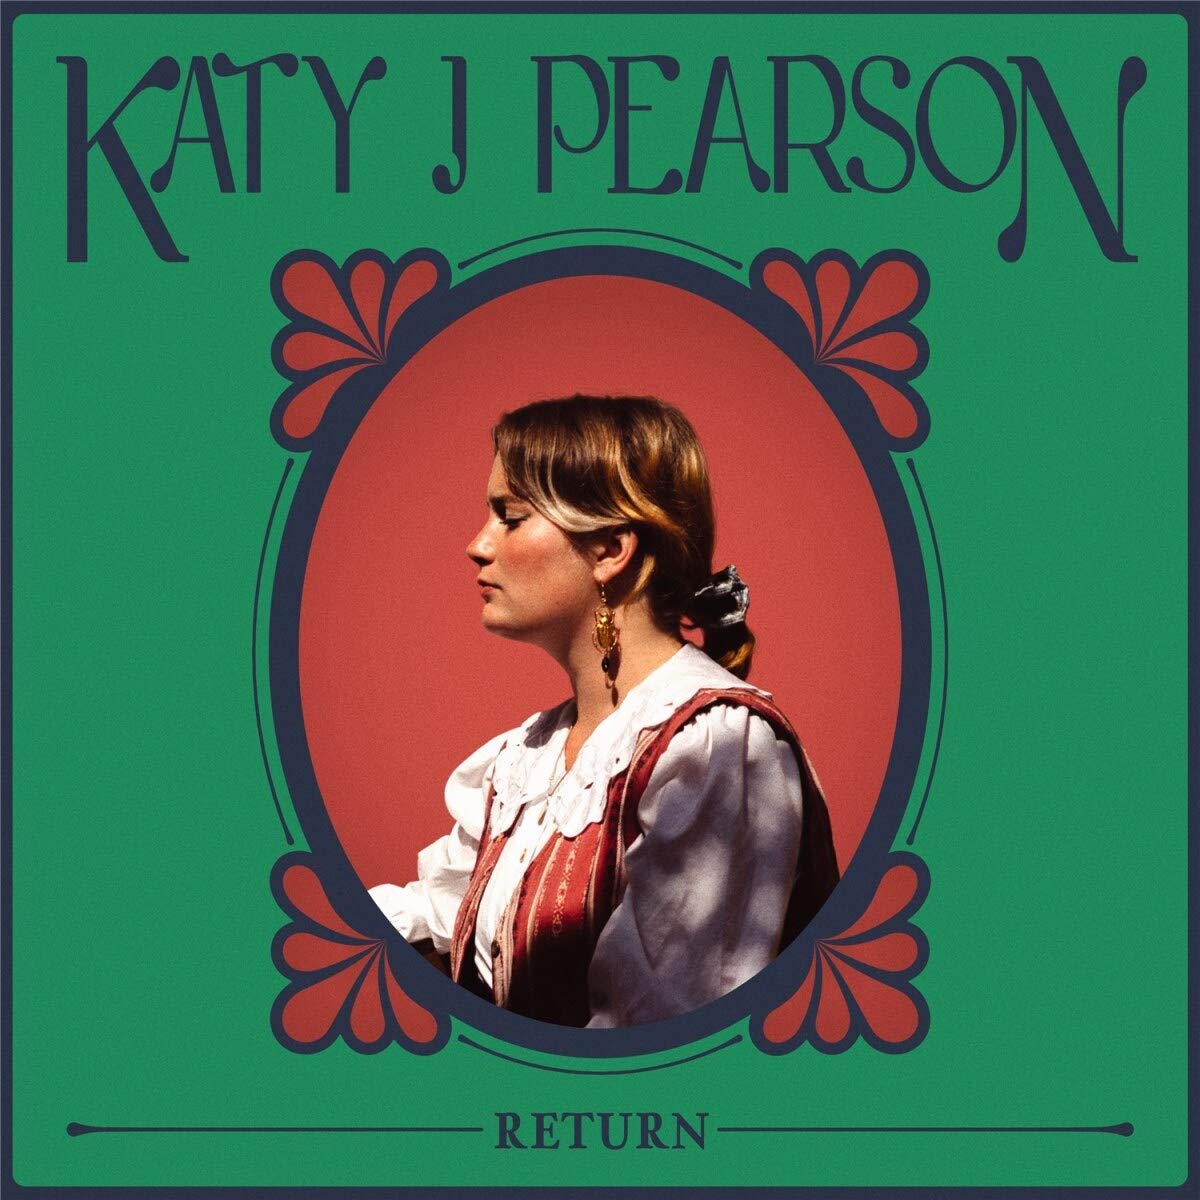 beautiful soul - katy j pearson - usa - indie - indie music - indie folk - new music - music blog - wolf in a suit - wolfinasuit - wolf in a suit blog - wolf in a suit music blog